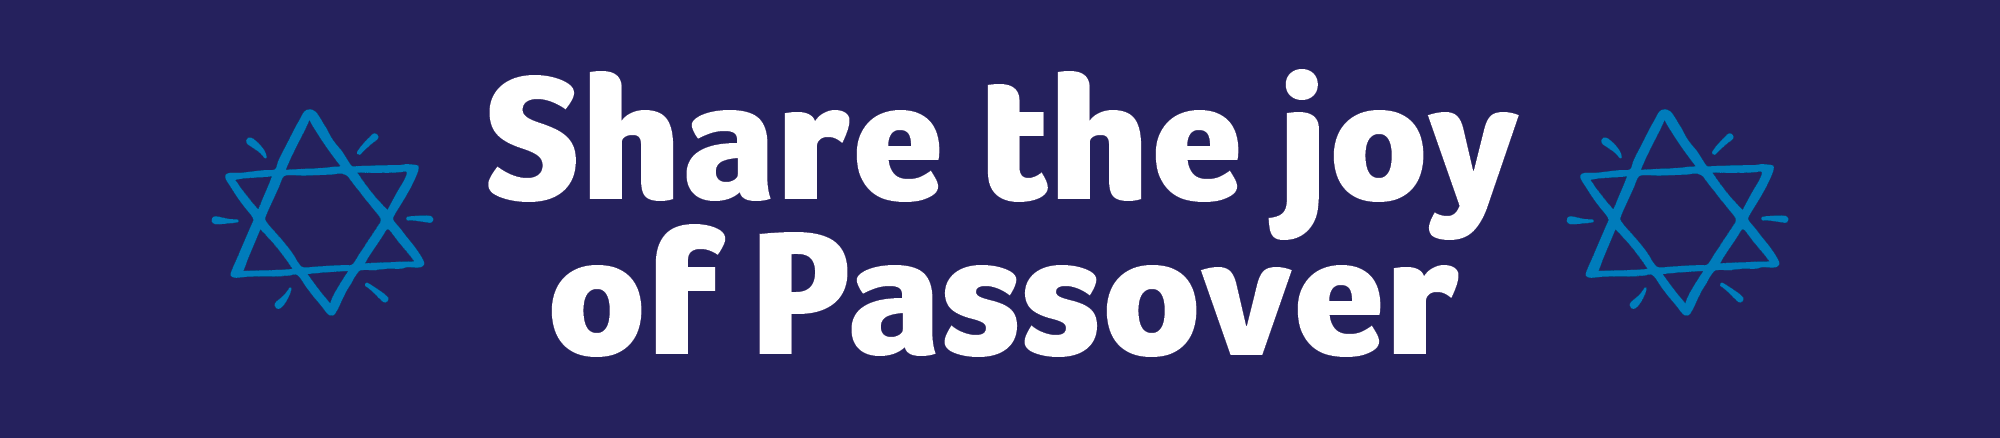 Share the joy of Passover